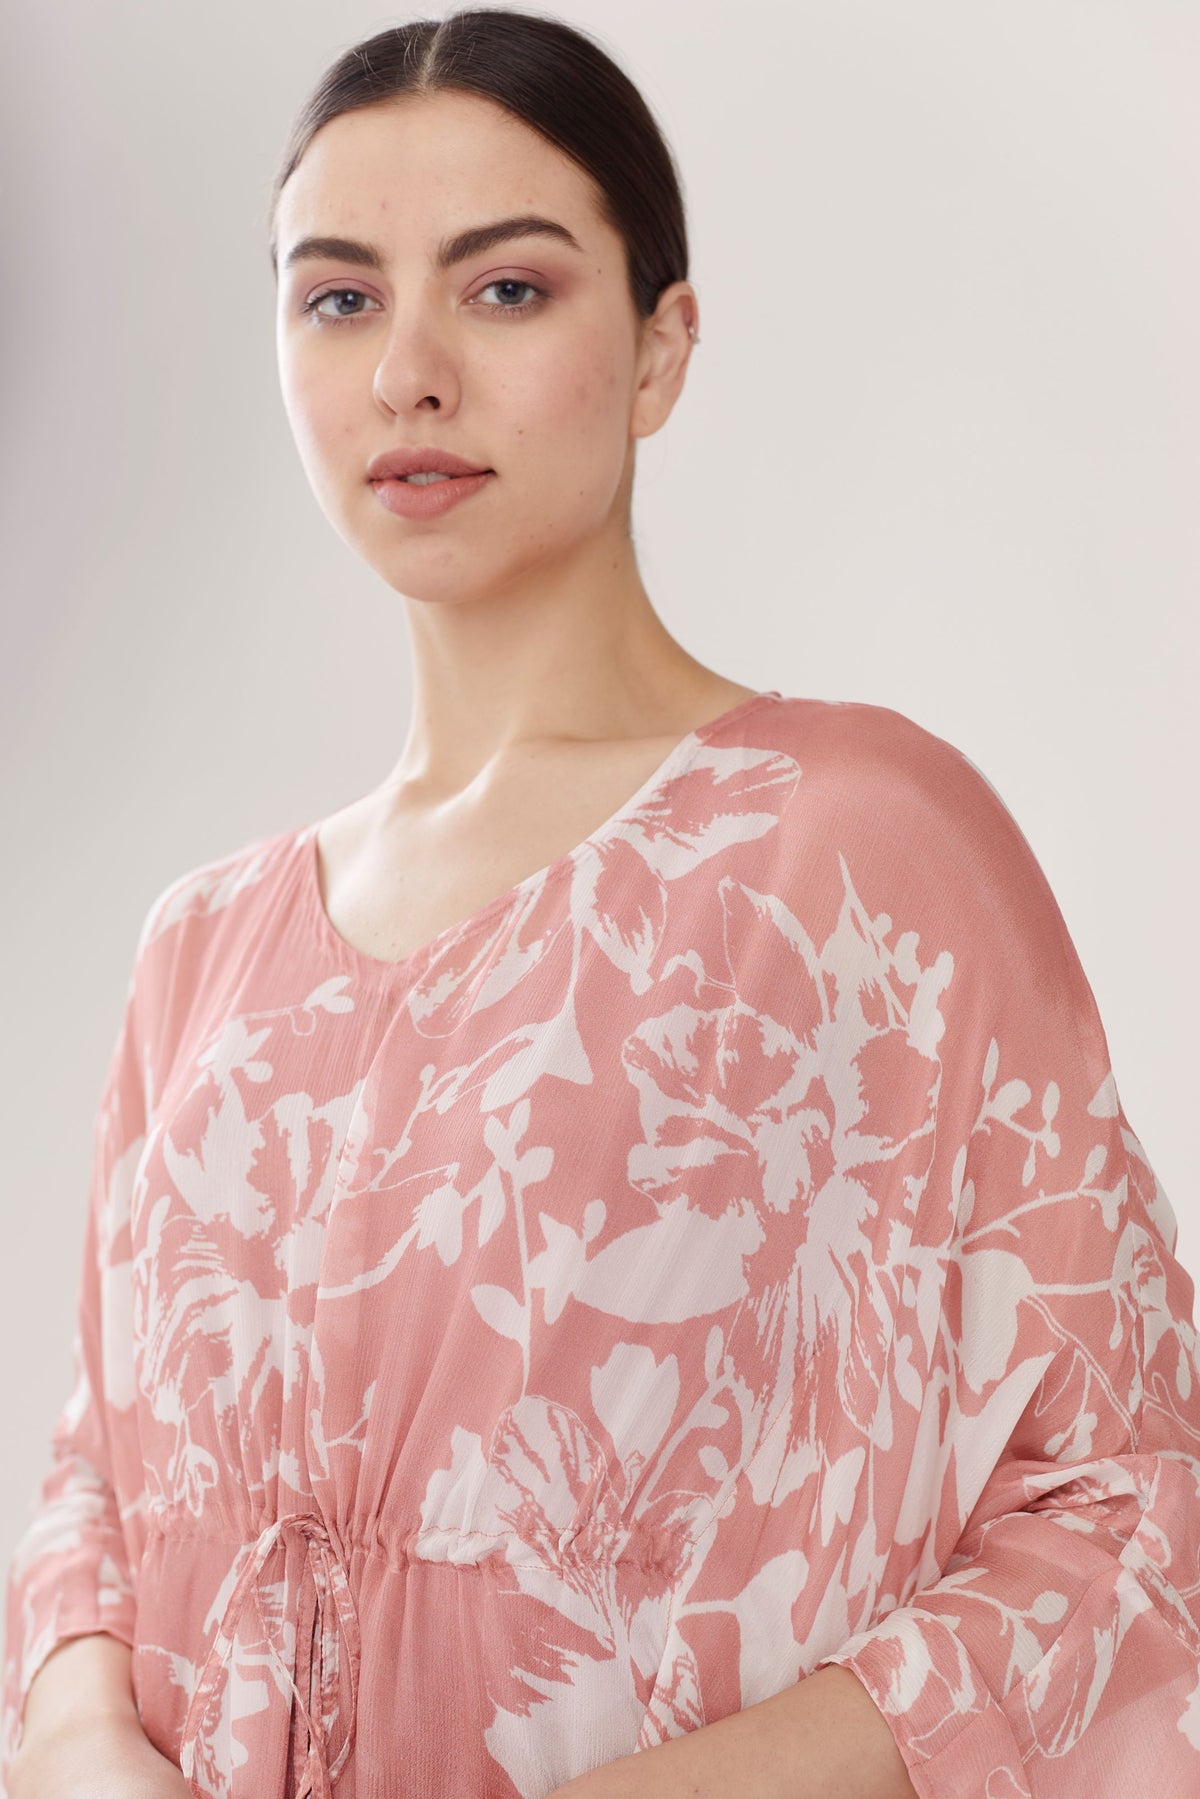 PINK AND WHITE FLORAL KAFTAN